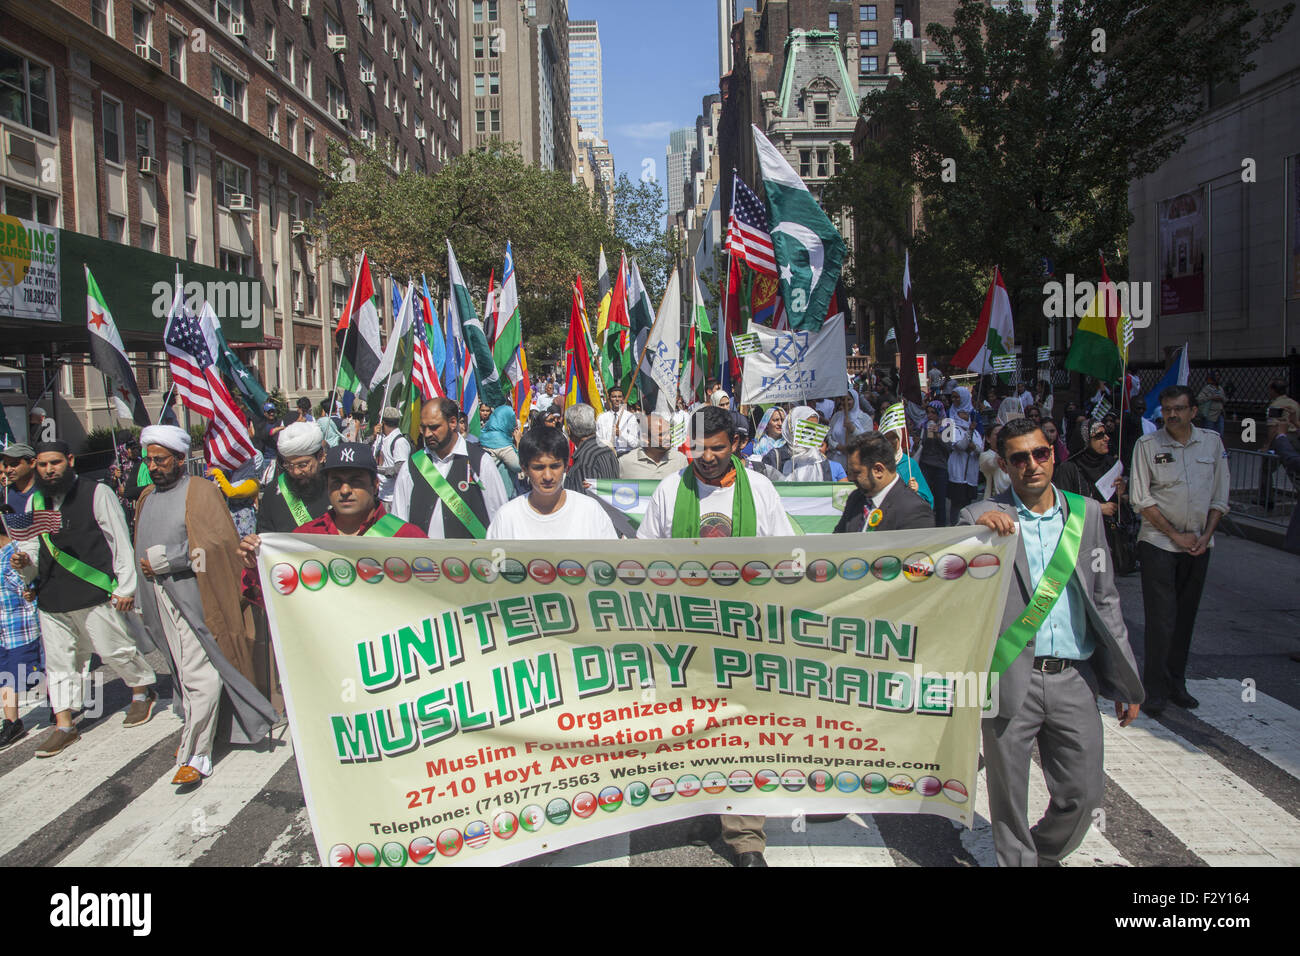 American Muslim Day Parade on Madison Ave. in New York City. Stock Photo